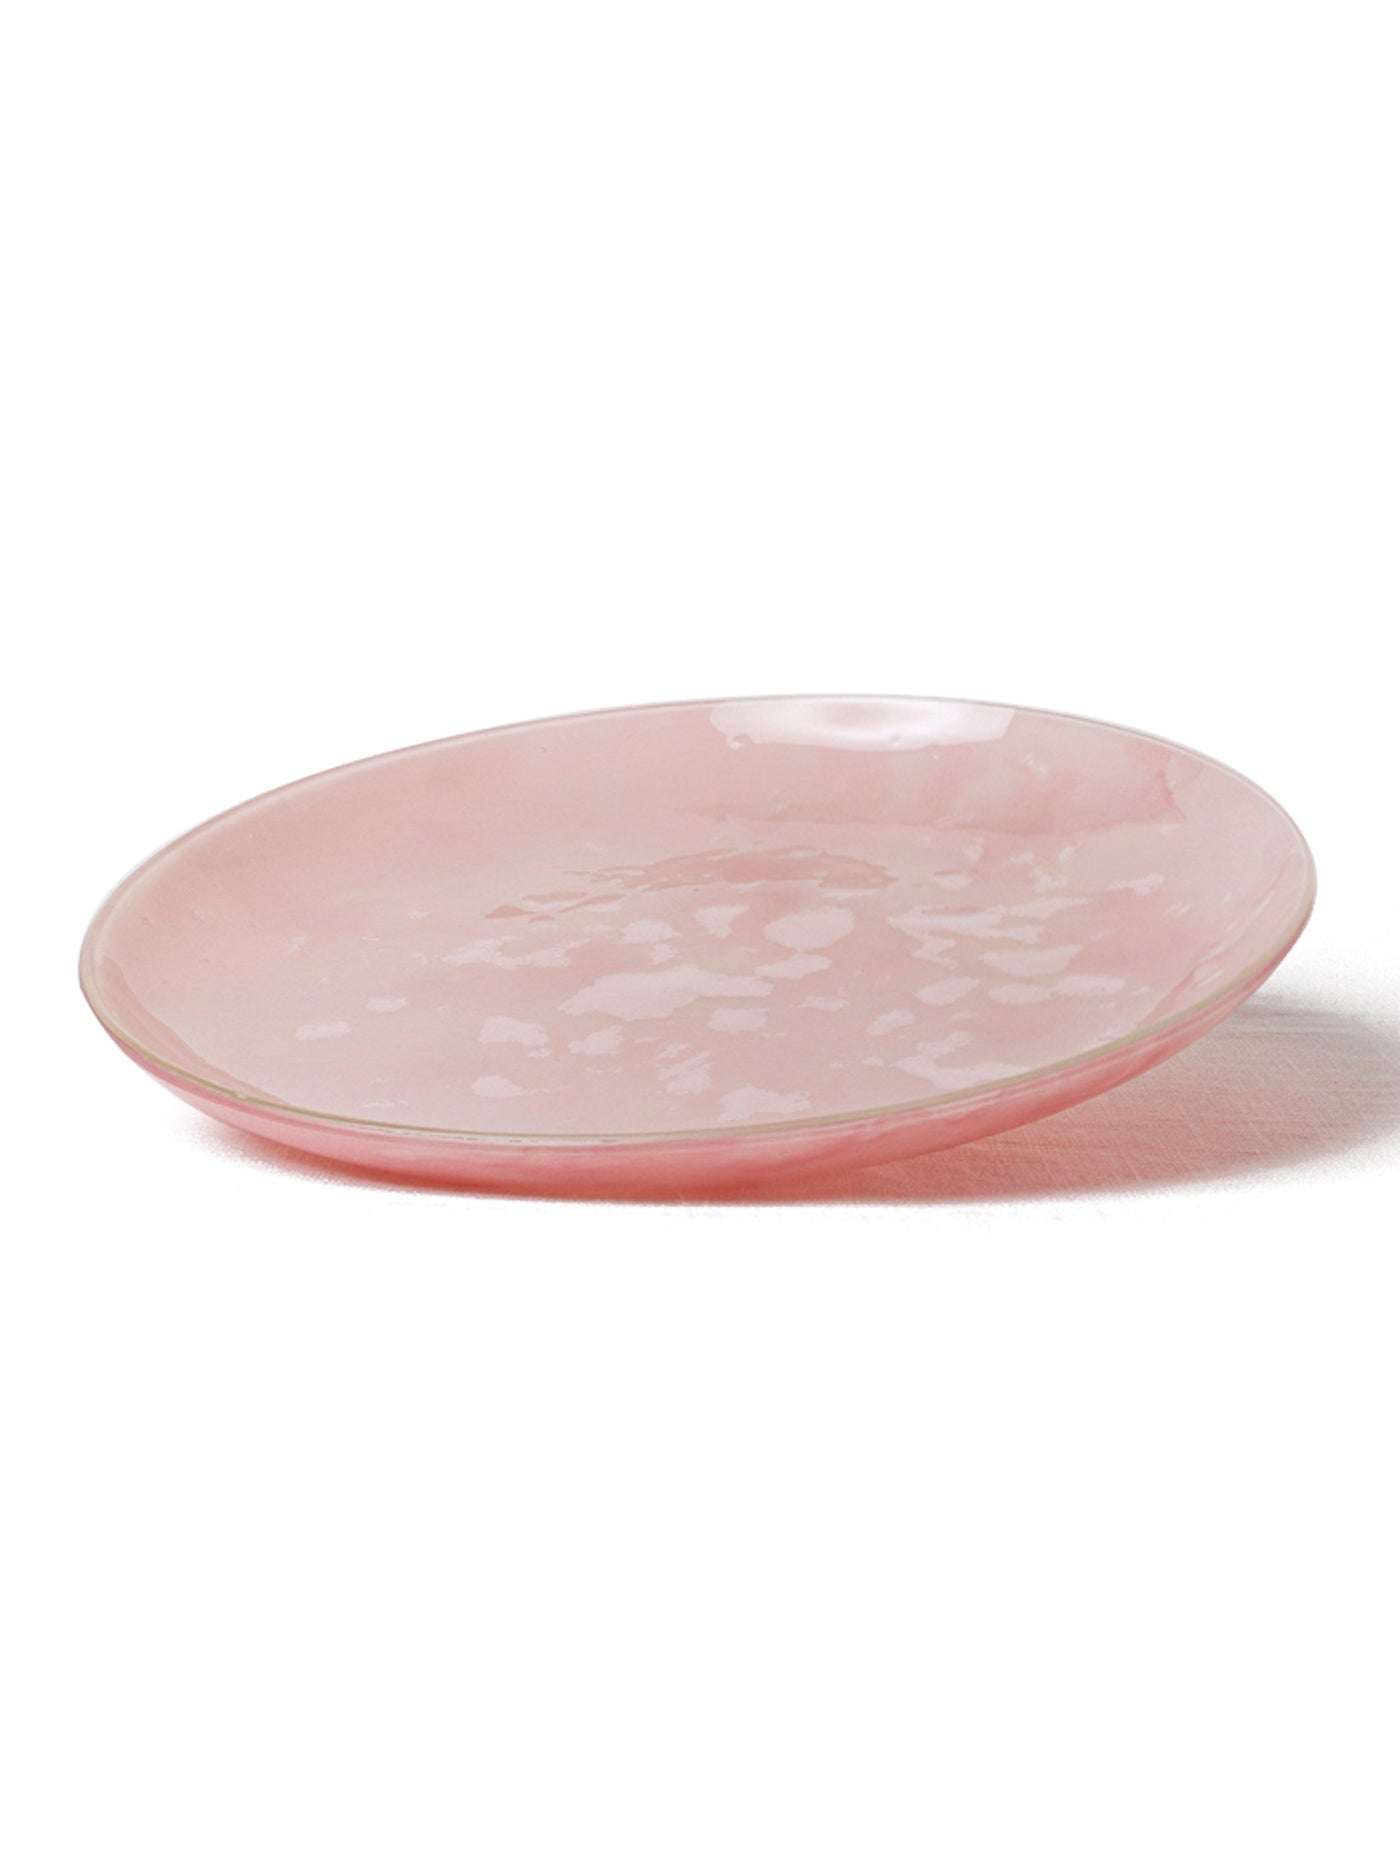 Handmade Glass Salad/Dessert Plate in Rose by Caju Collective